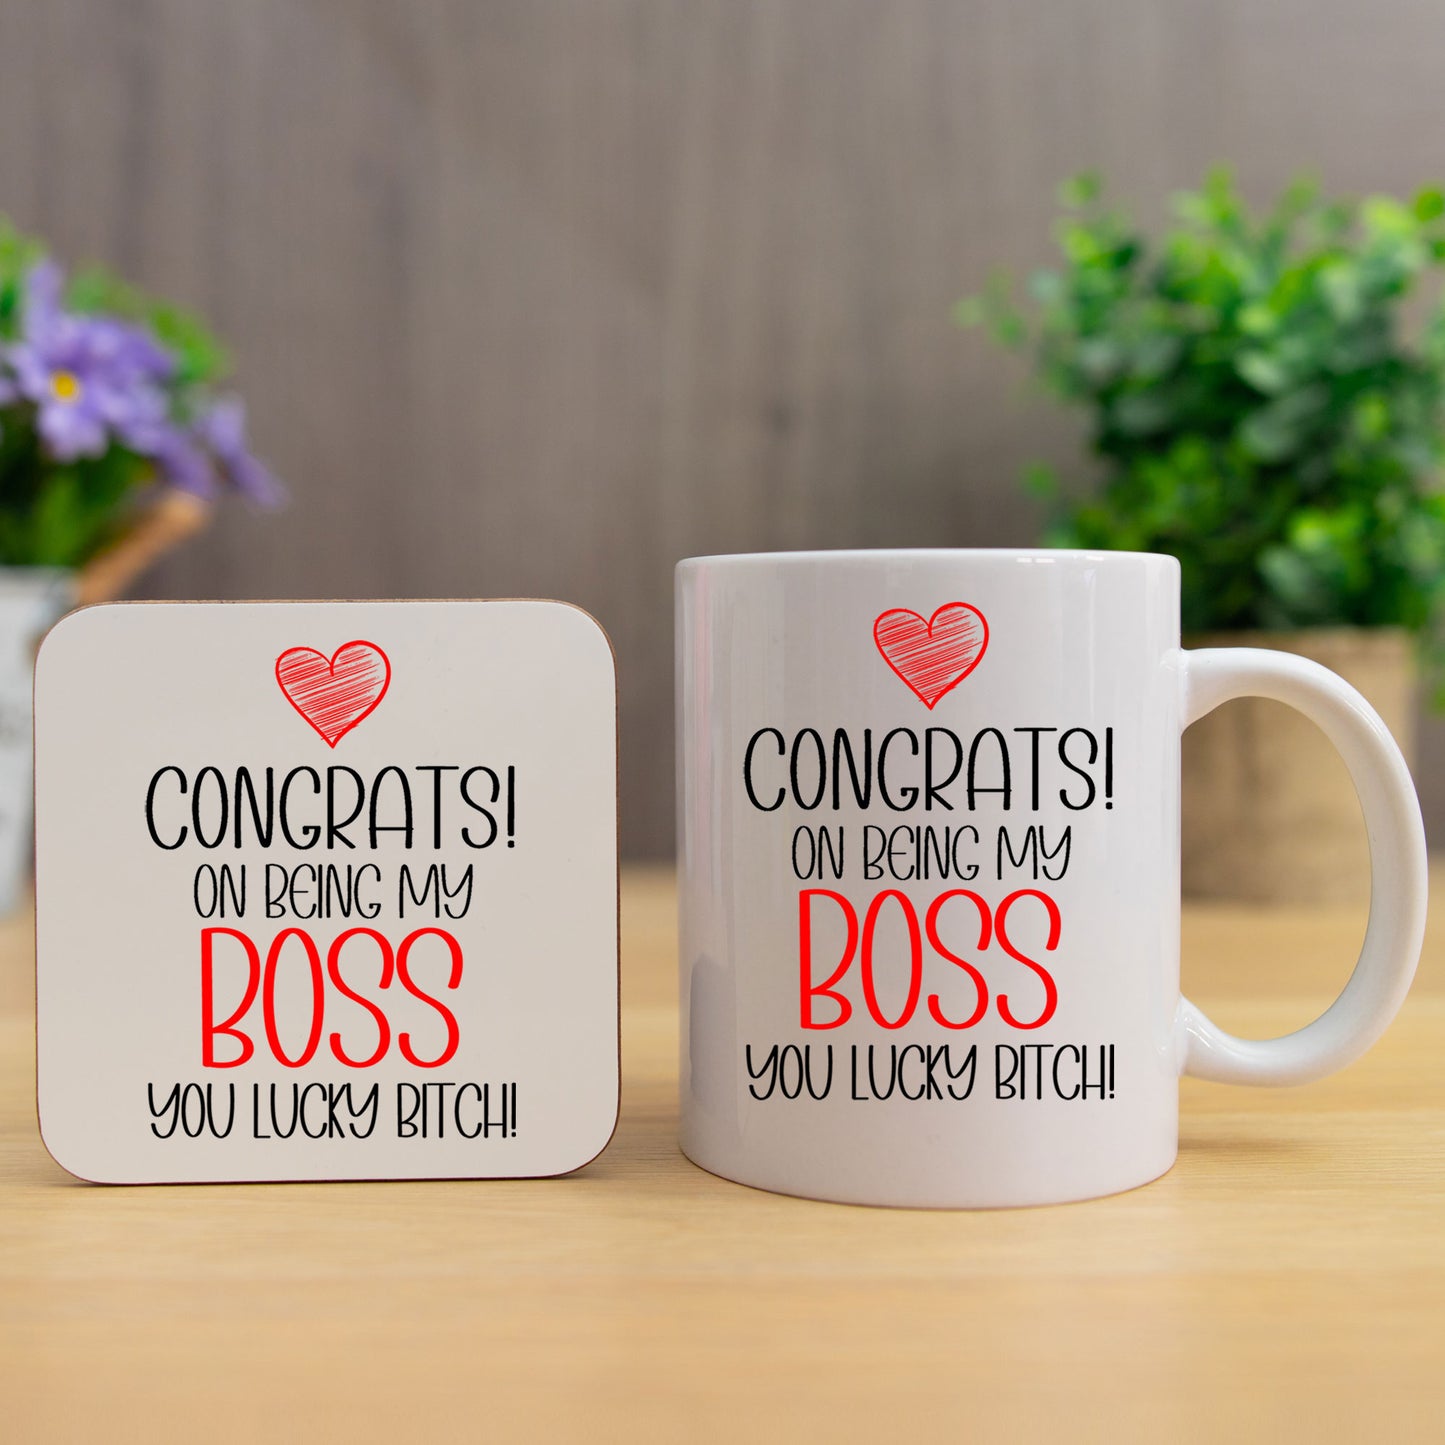 Congrats On Being My Boss Mug and/or Coaster Gift  - Always Looking Good - Lucky Bitch Mug & Coaster Set  